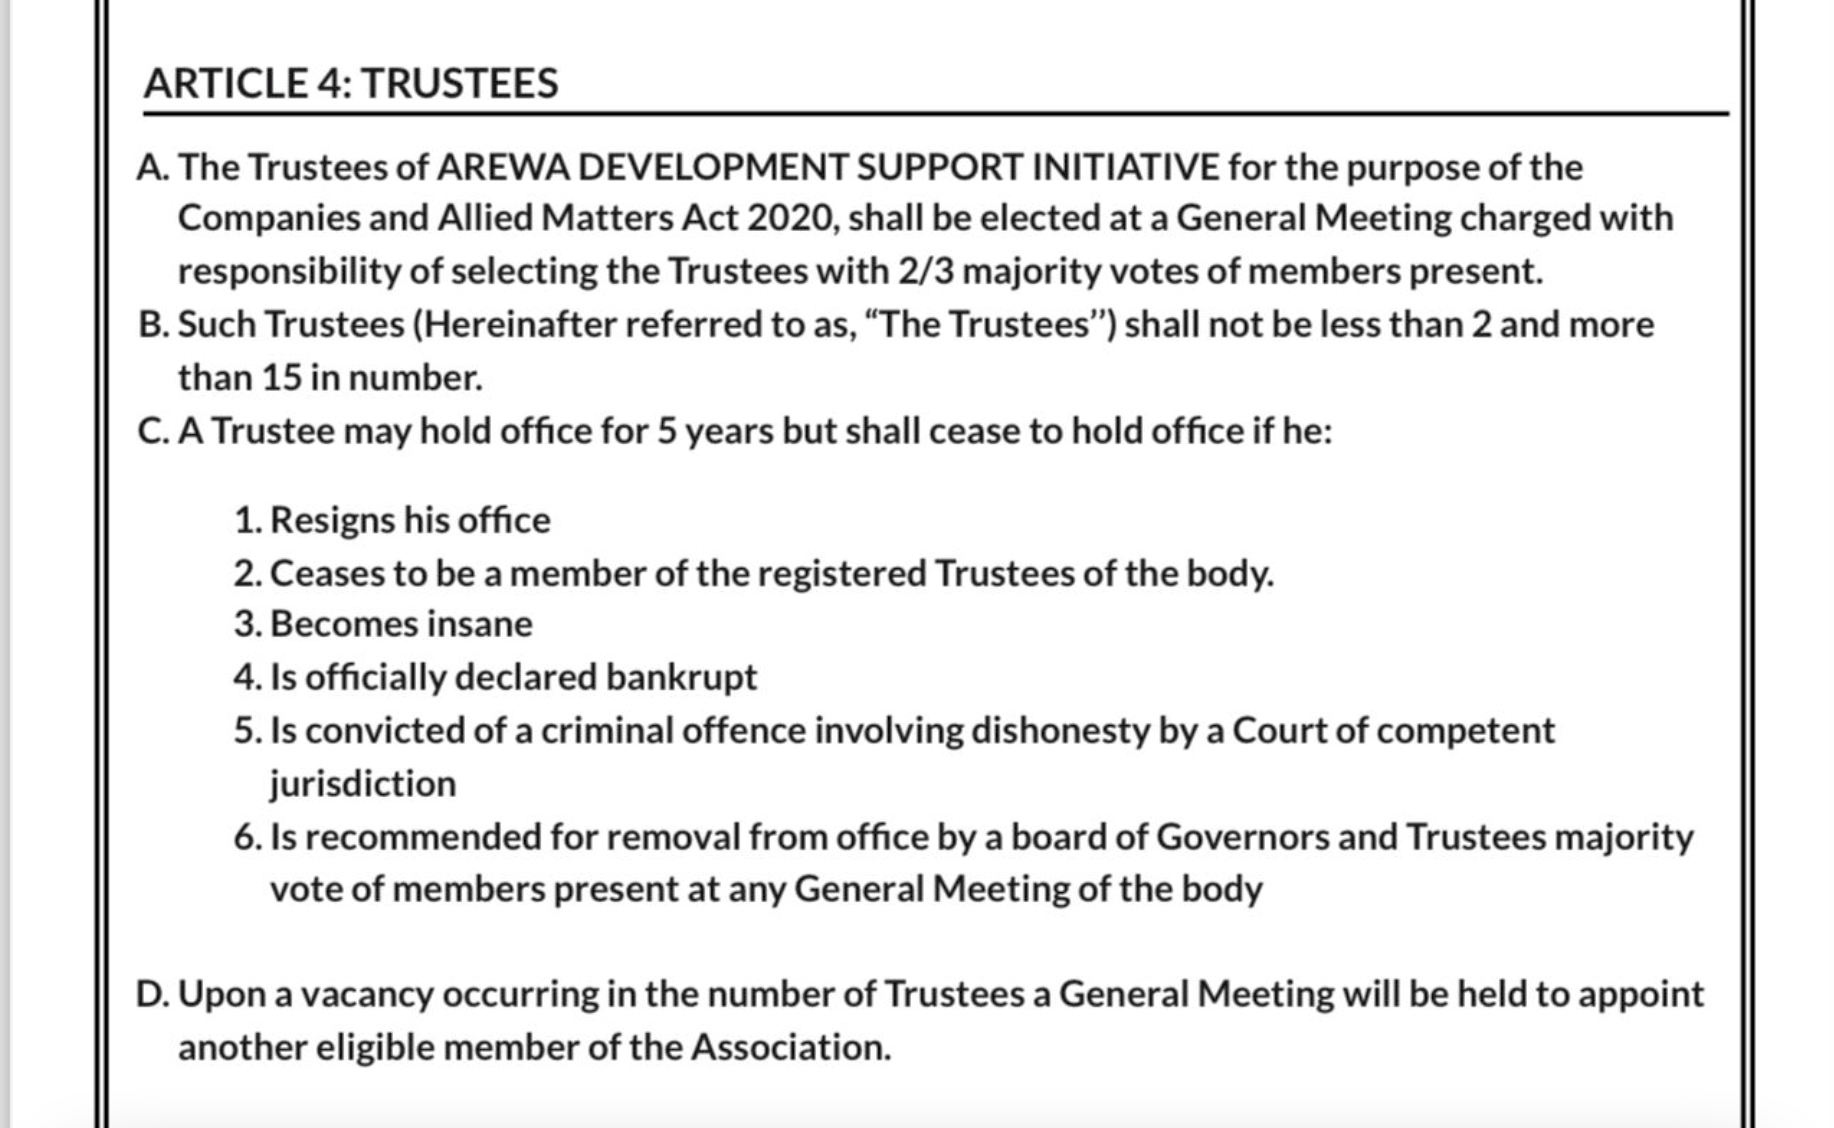 Altered Article 4G of the Trustees